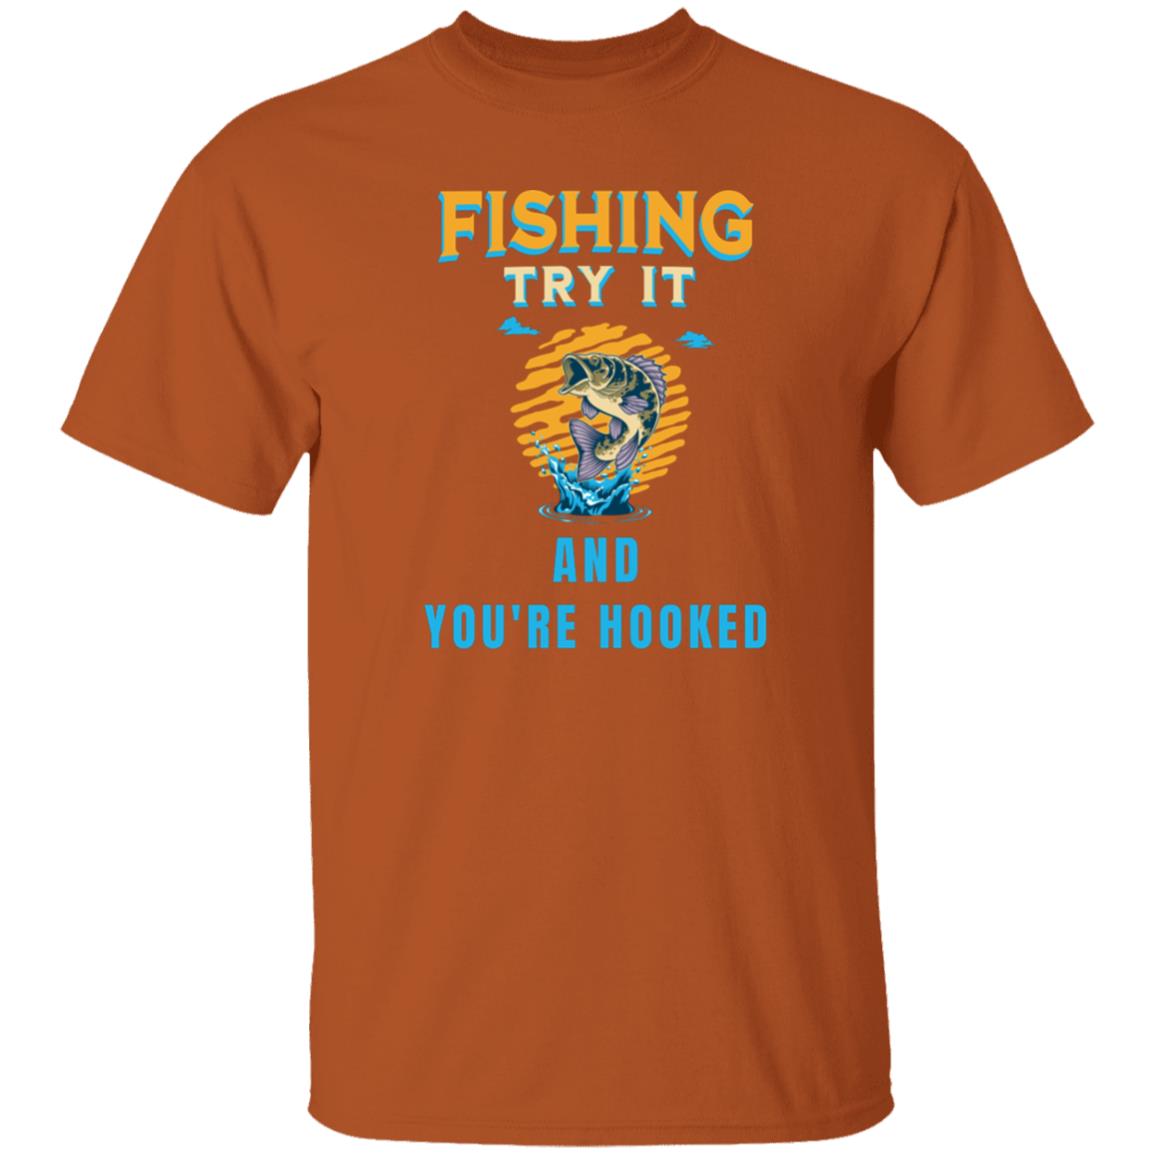 Fishing try it and you're hooked k t-shirt texas-orange